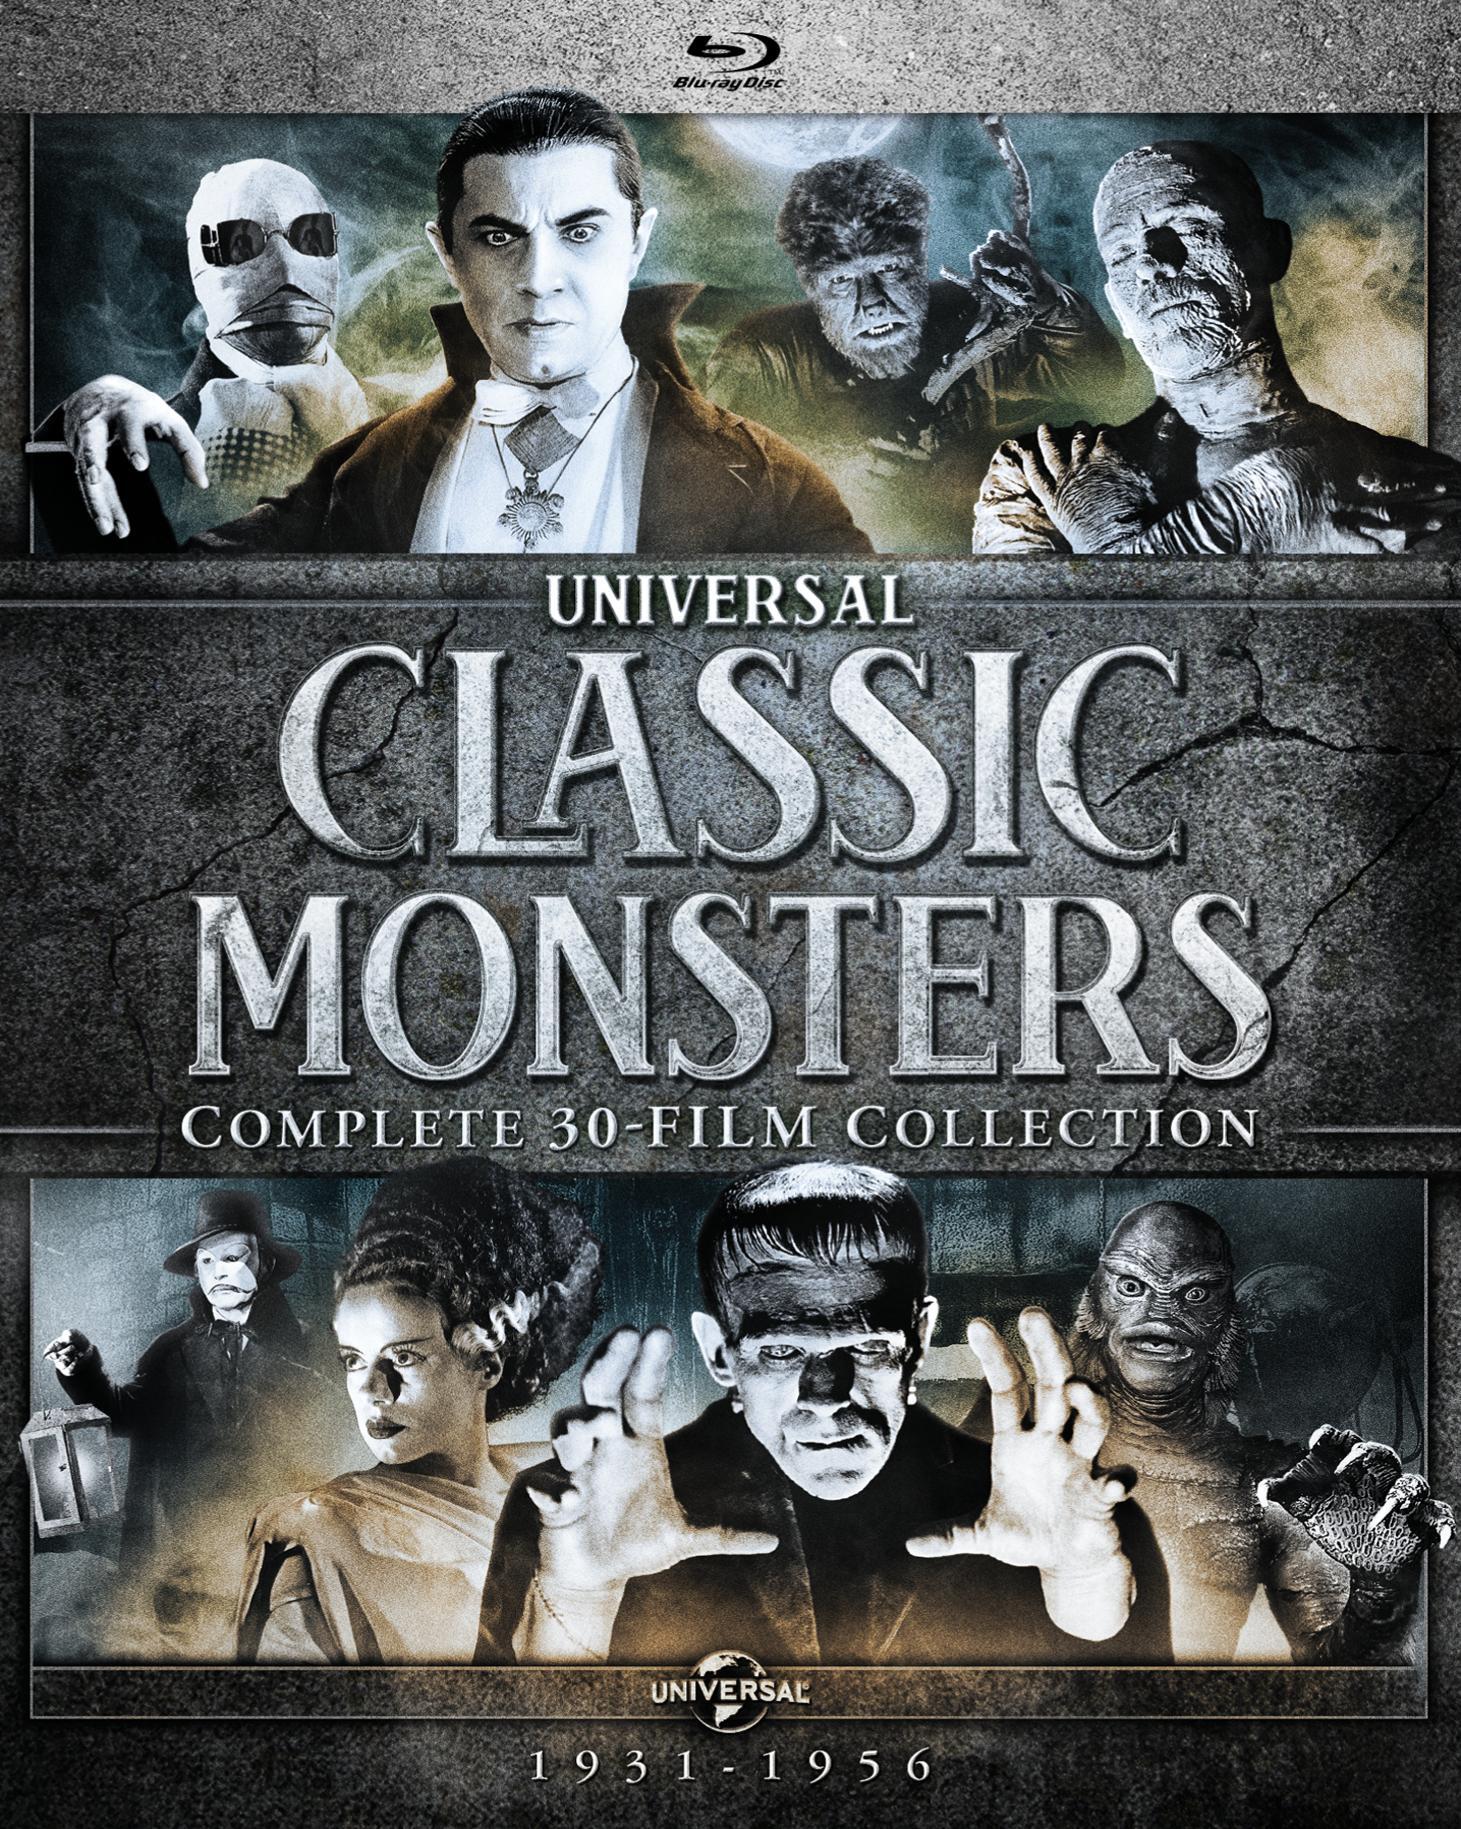 Universal Classic Monsters: Complete 30-Film Collection (Box Set) - Blu-ray   - Classic Movies On Blu-ray - Movies On GRUV